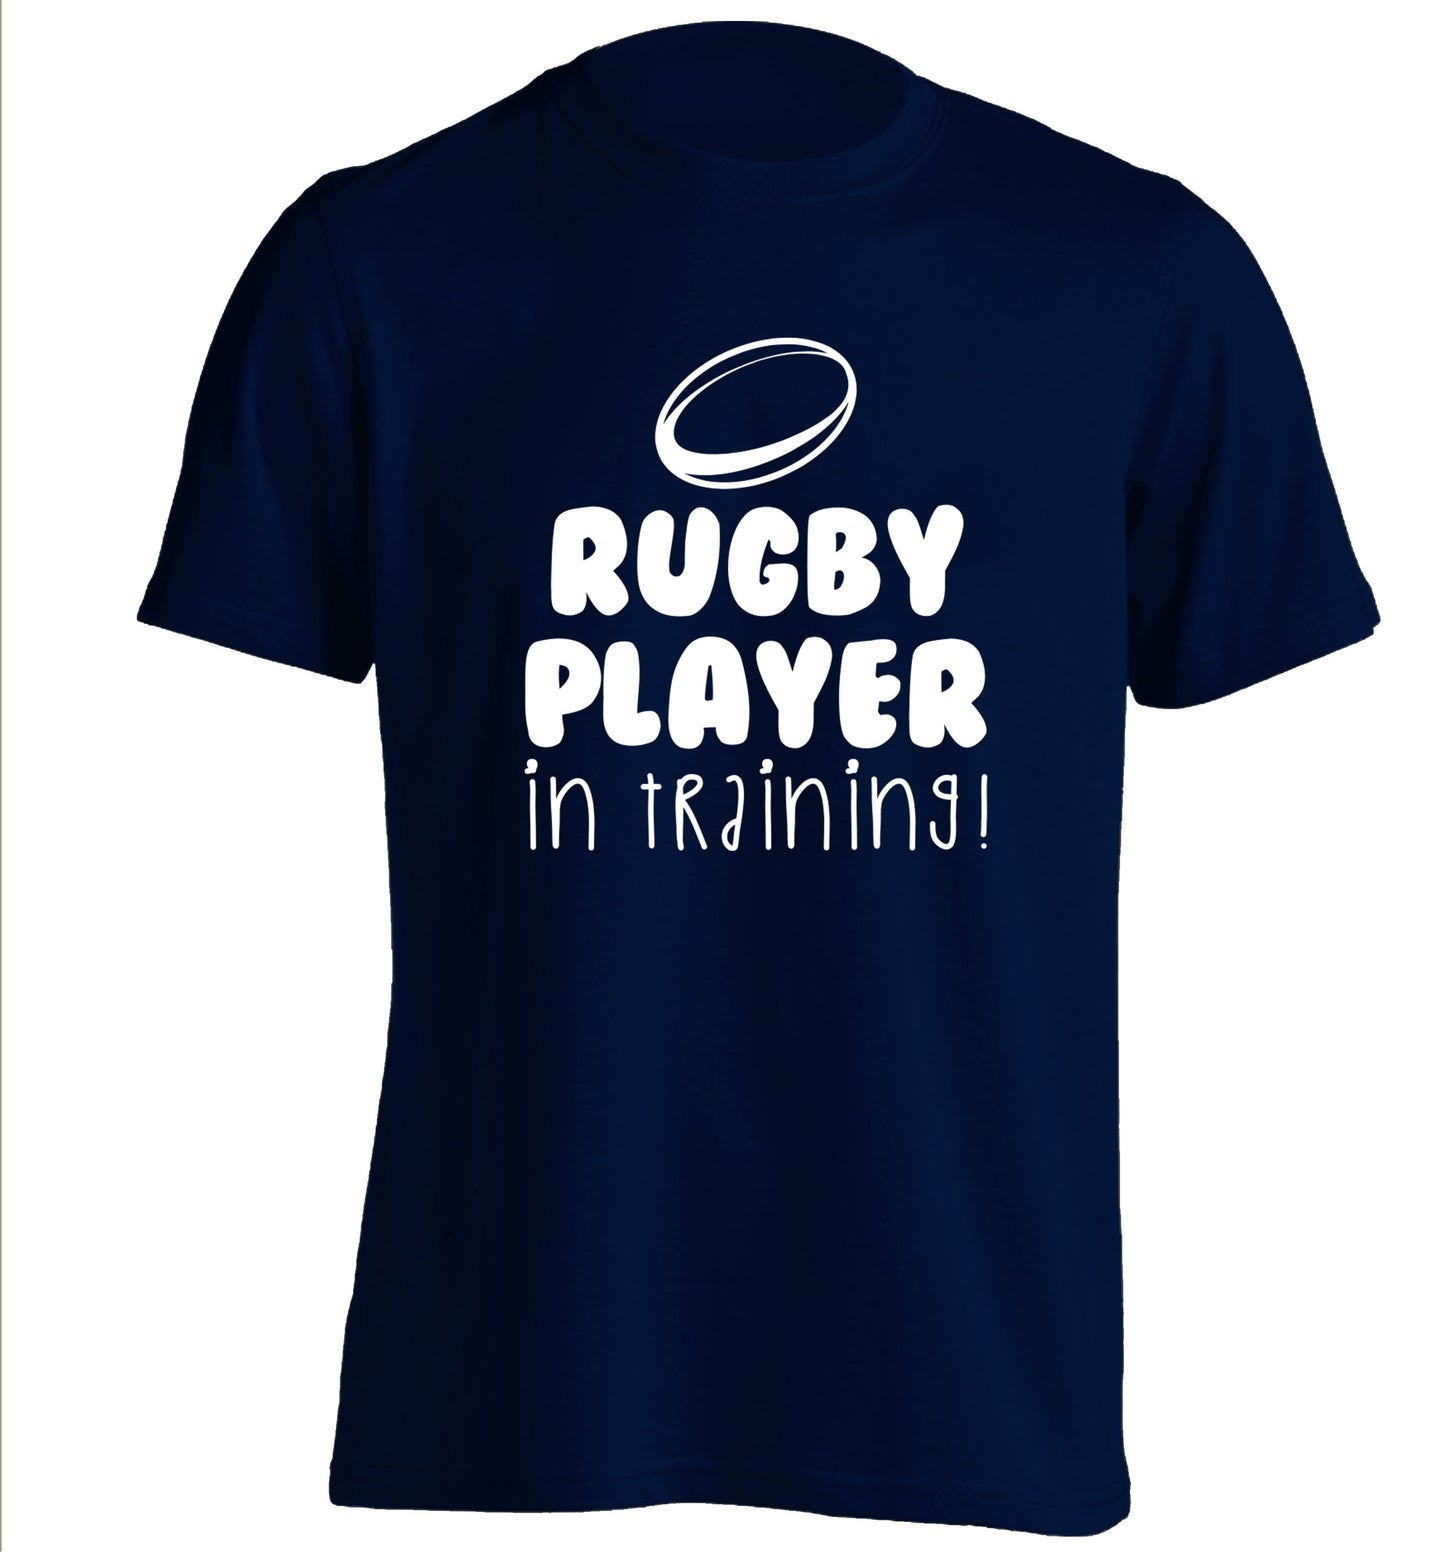 Rugby player in training adults unisex navy Tshirt 2XL